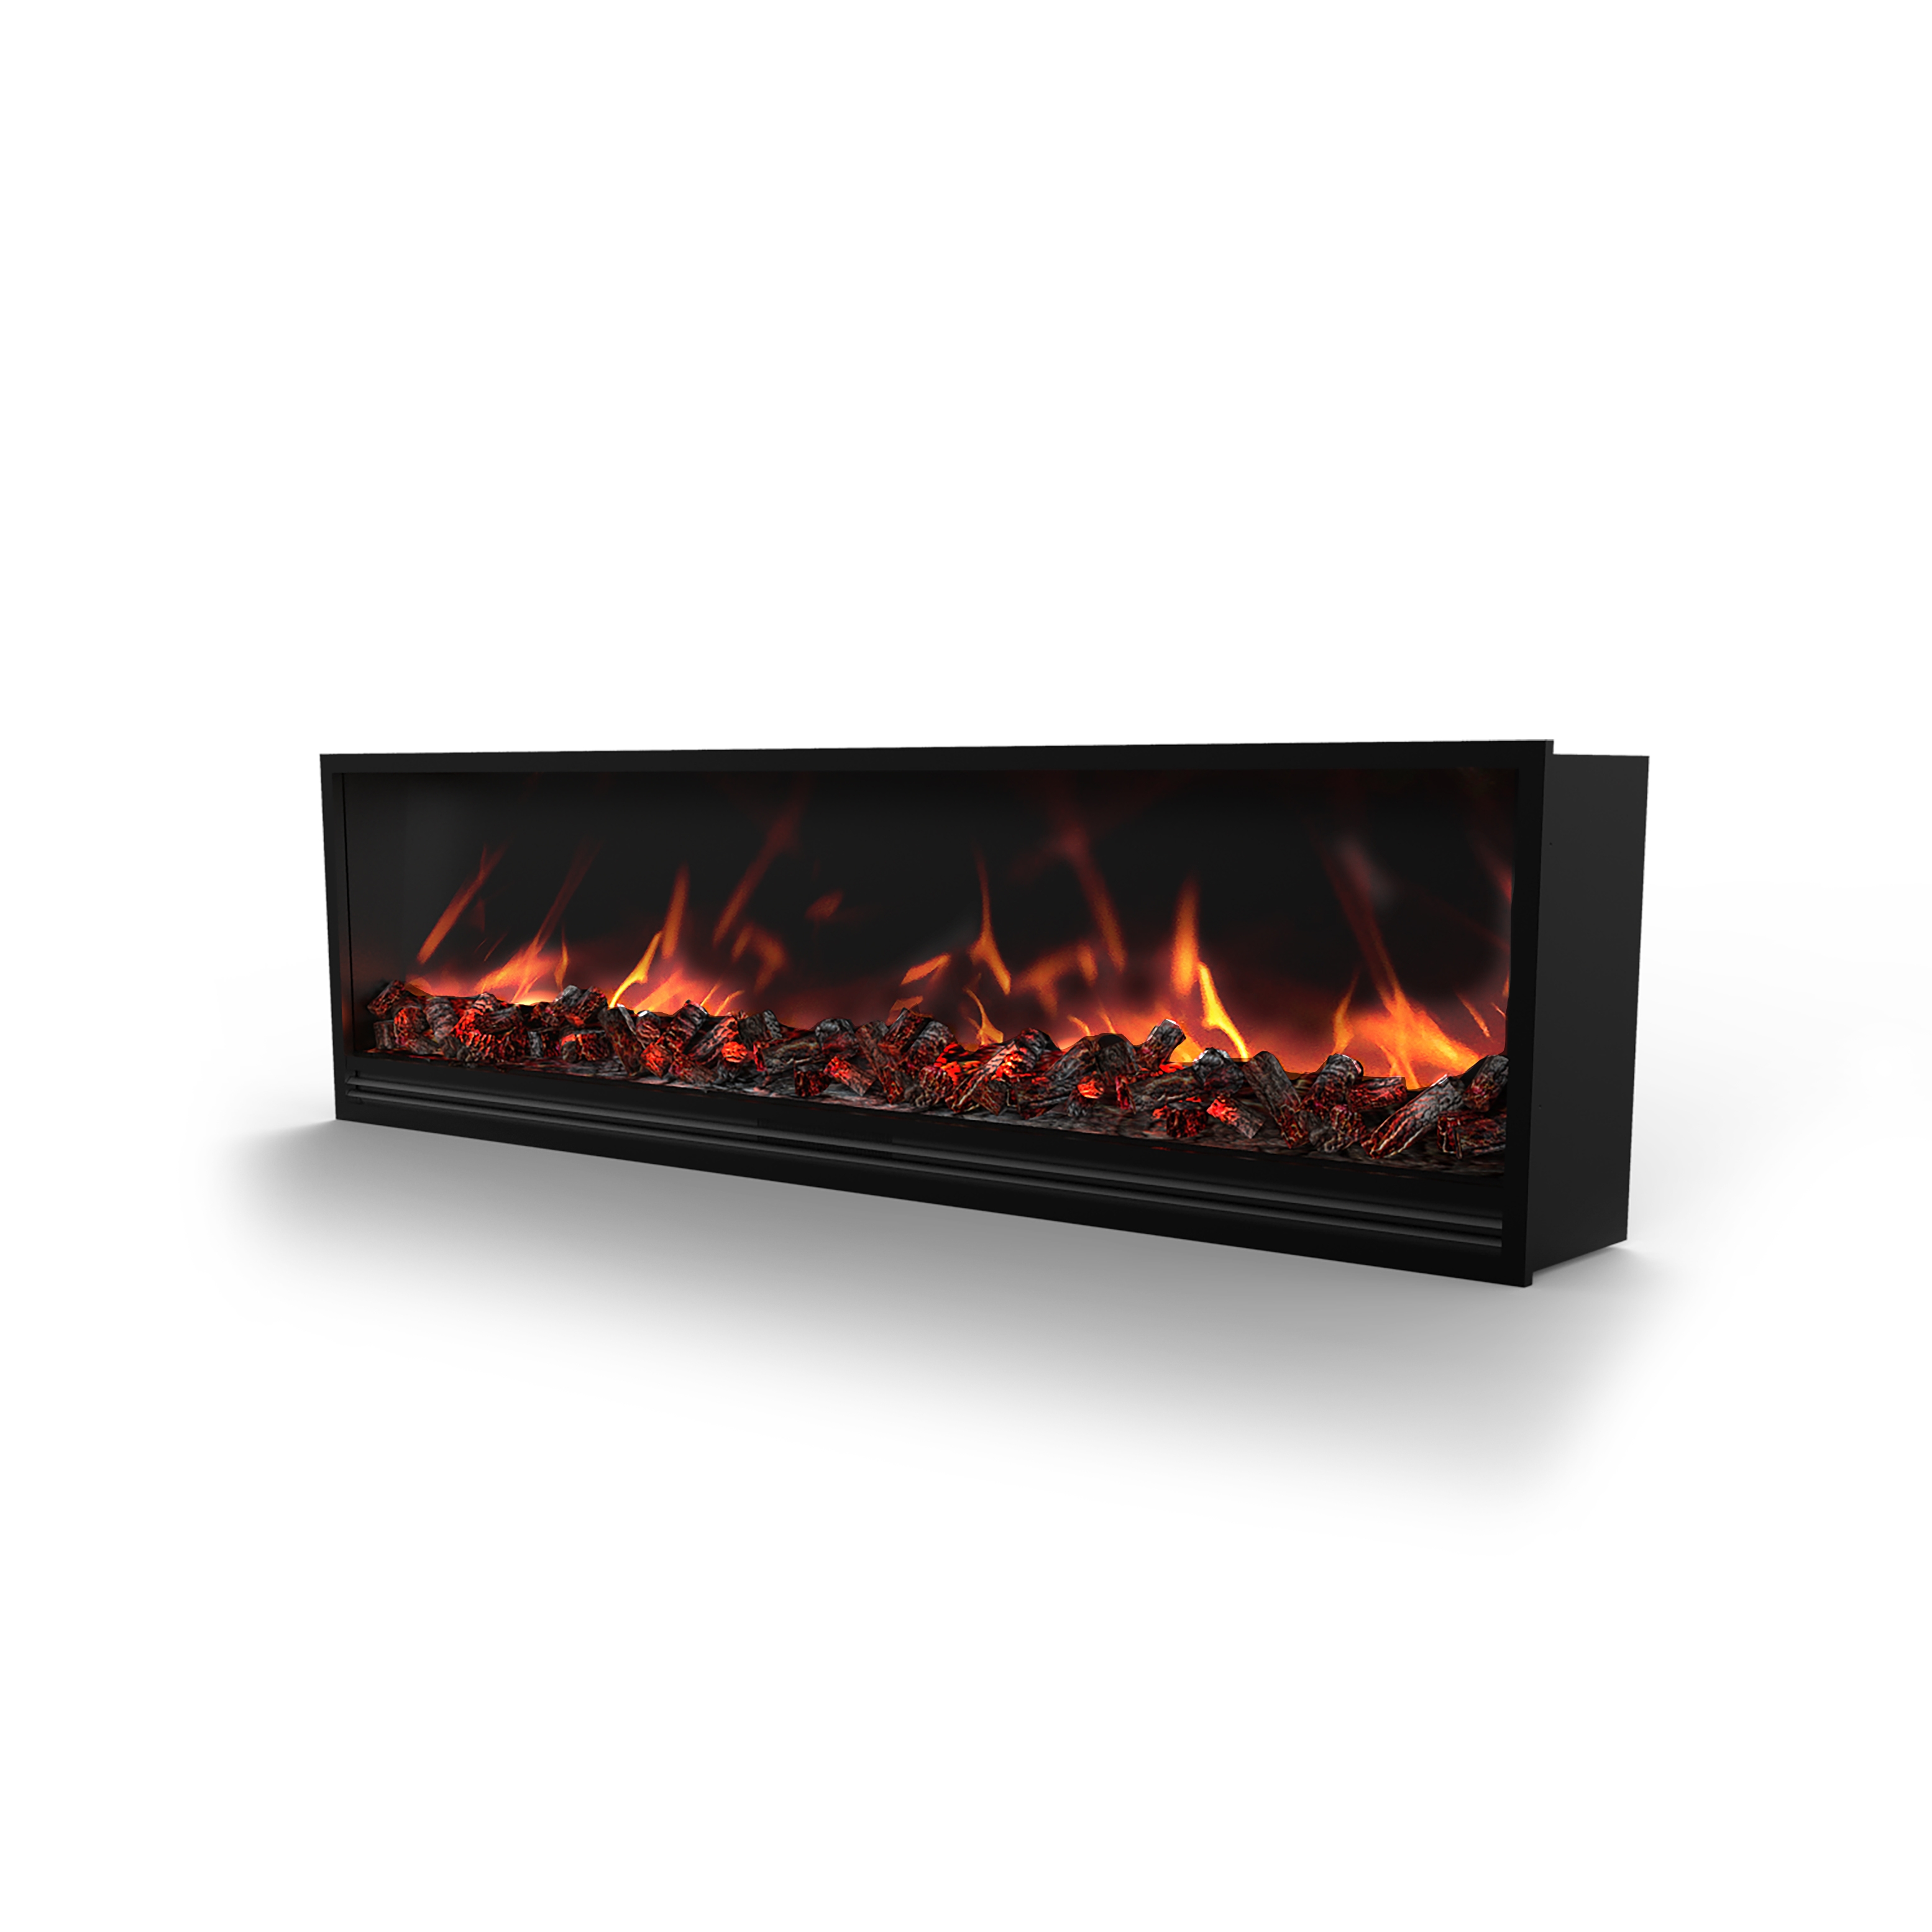 Electric Fireplace El902, Electric Design Fireplaces